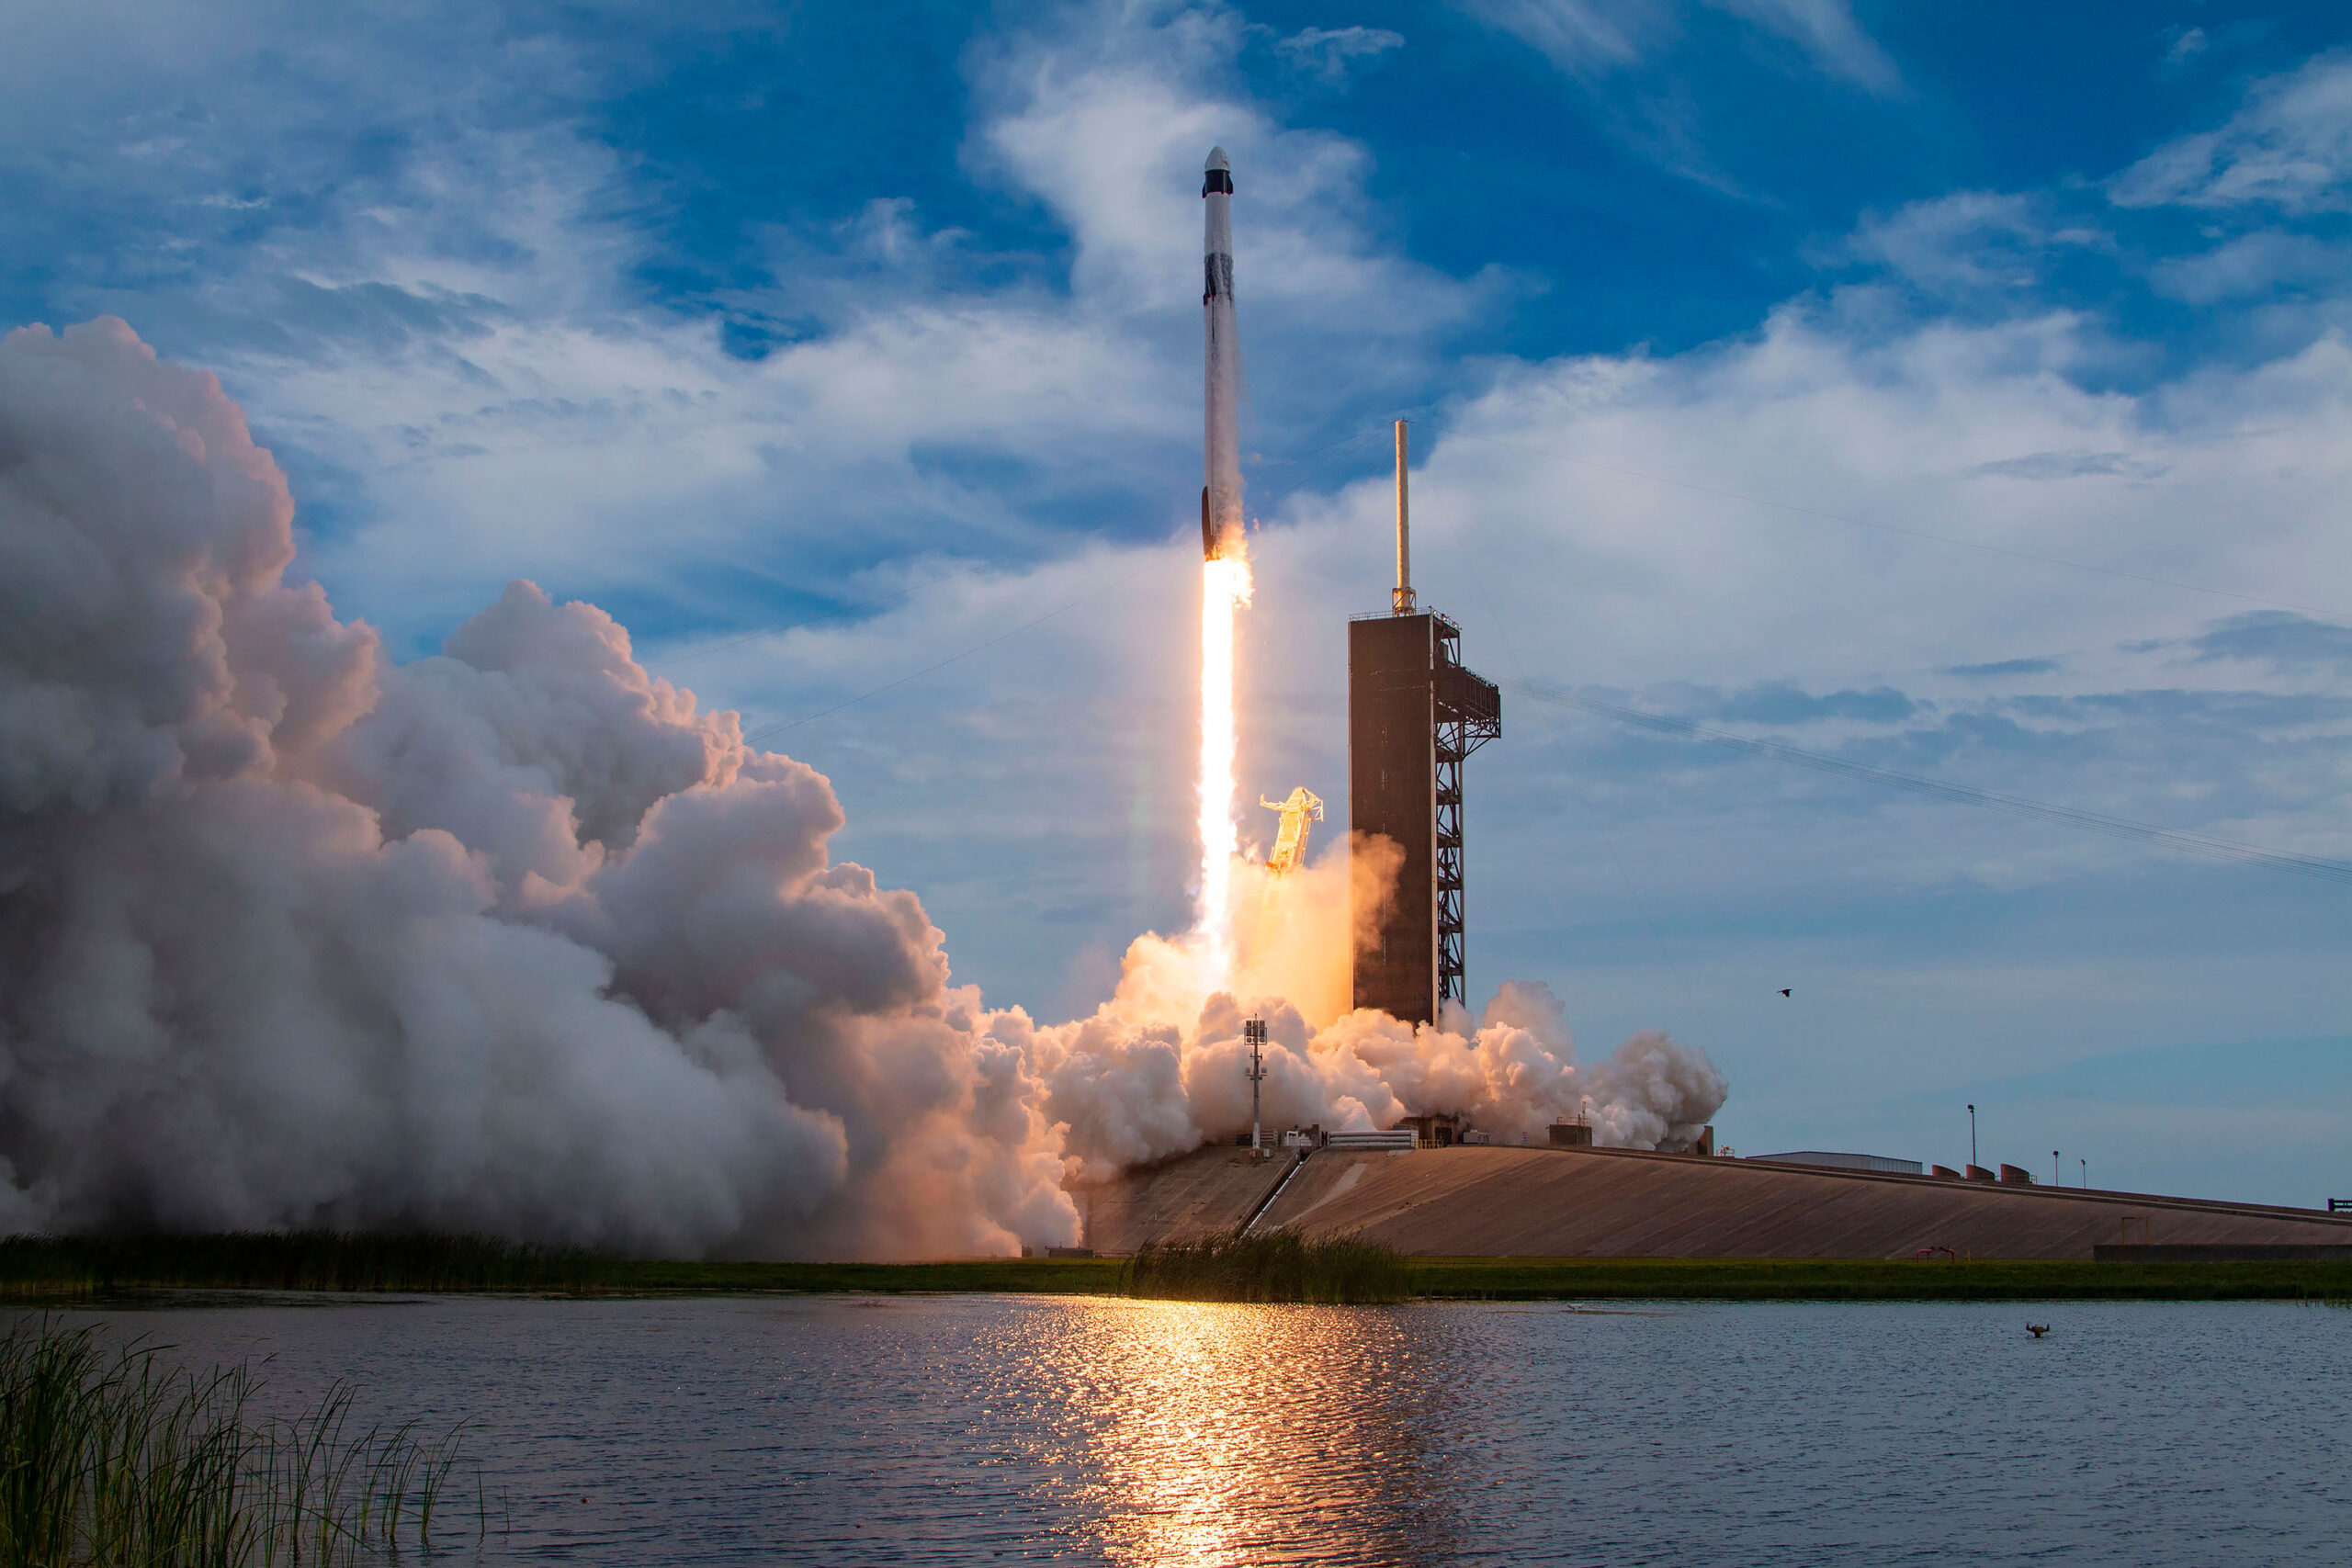 WATCH NASA, SpaceX Successfully Launch Axiom Space Mission2 from KSC